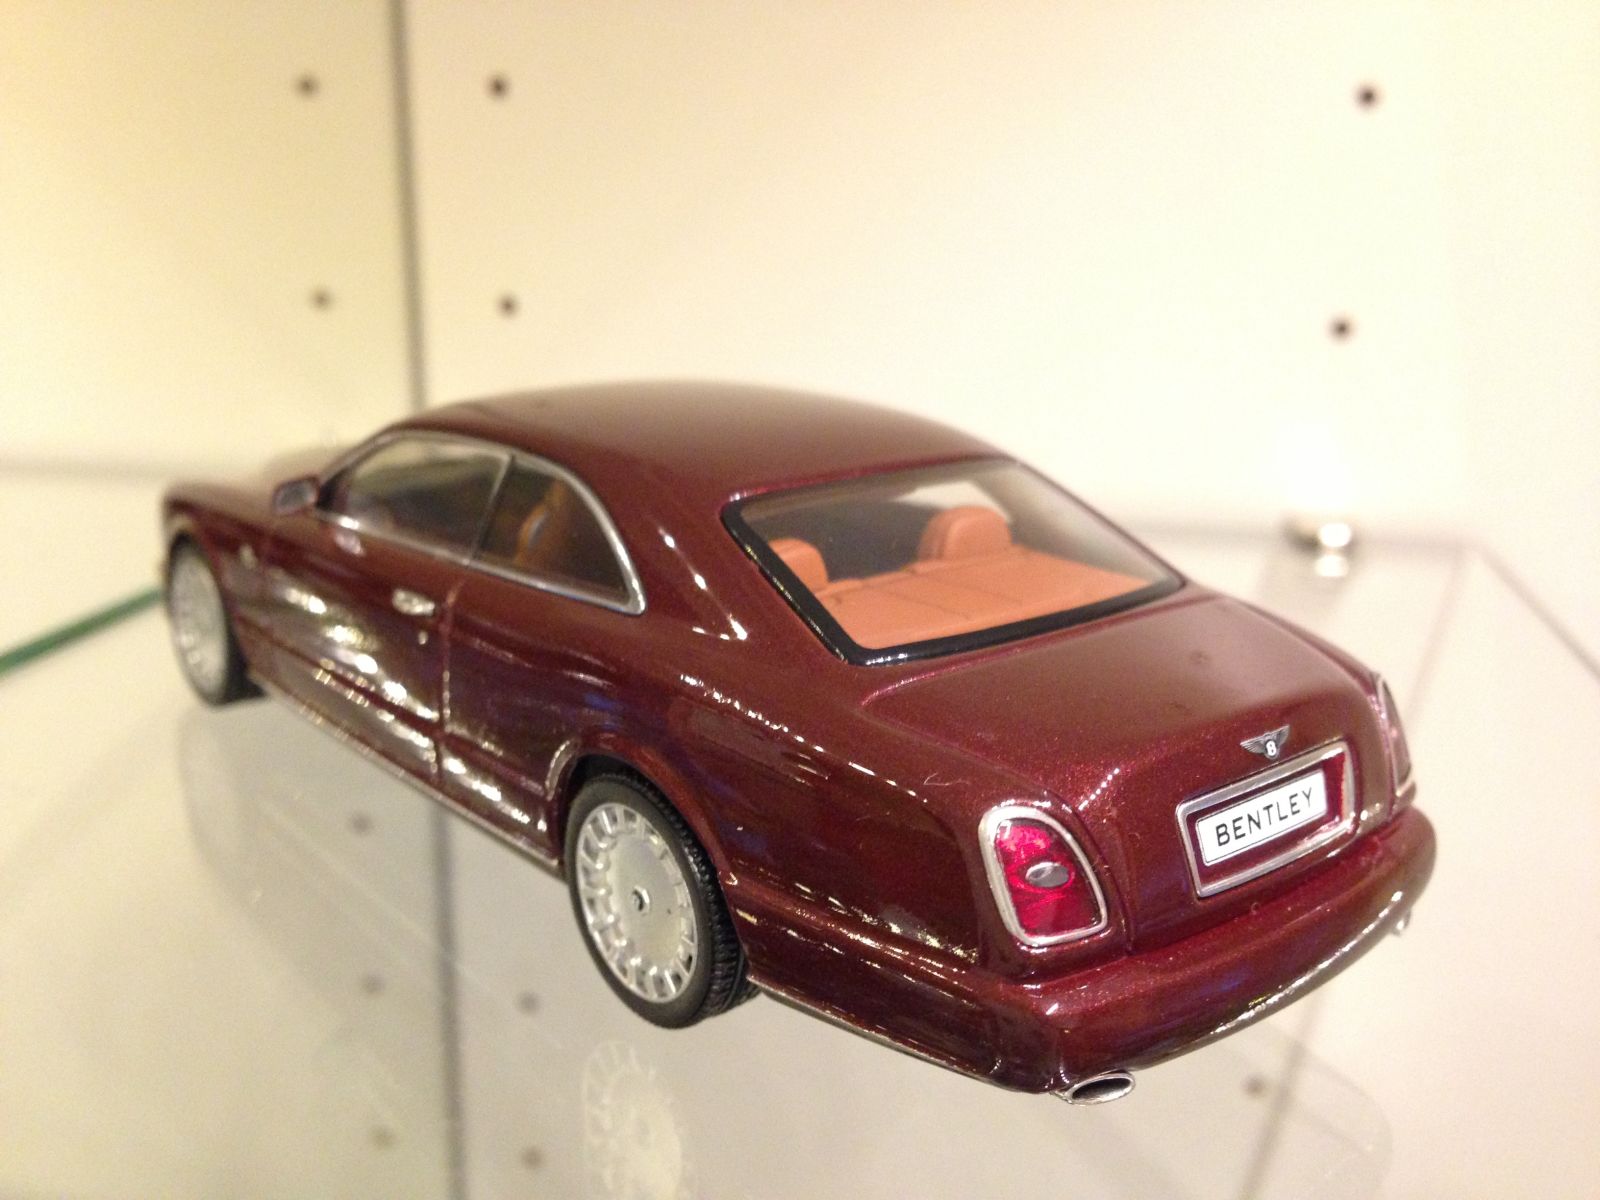 Illustration for article titled Finally snagged a Bentley Brooklands!